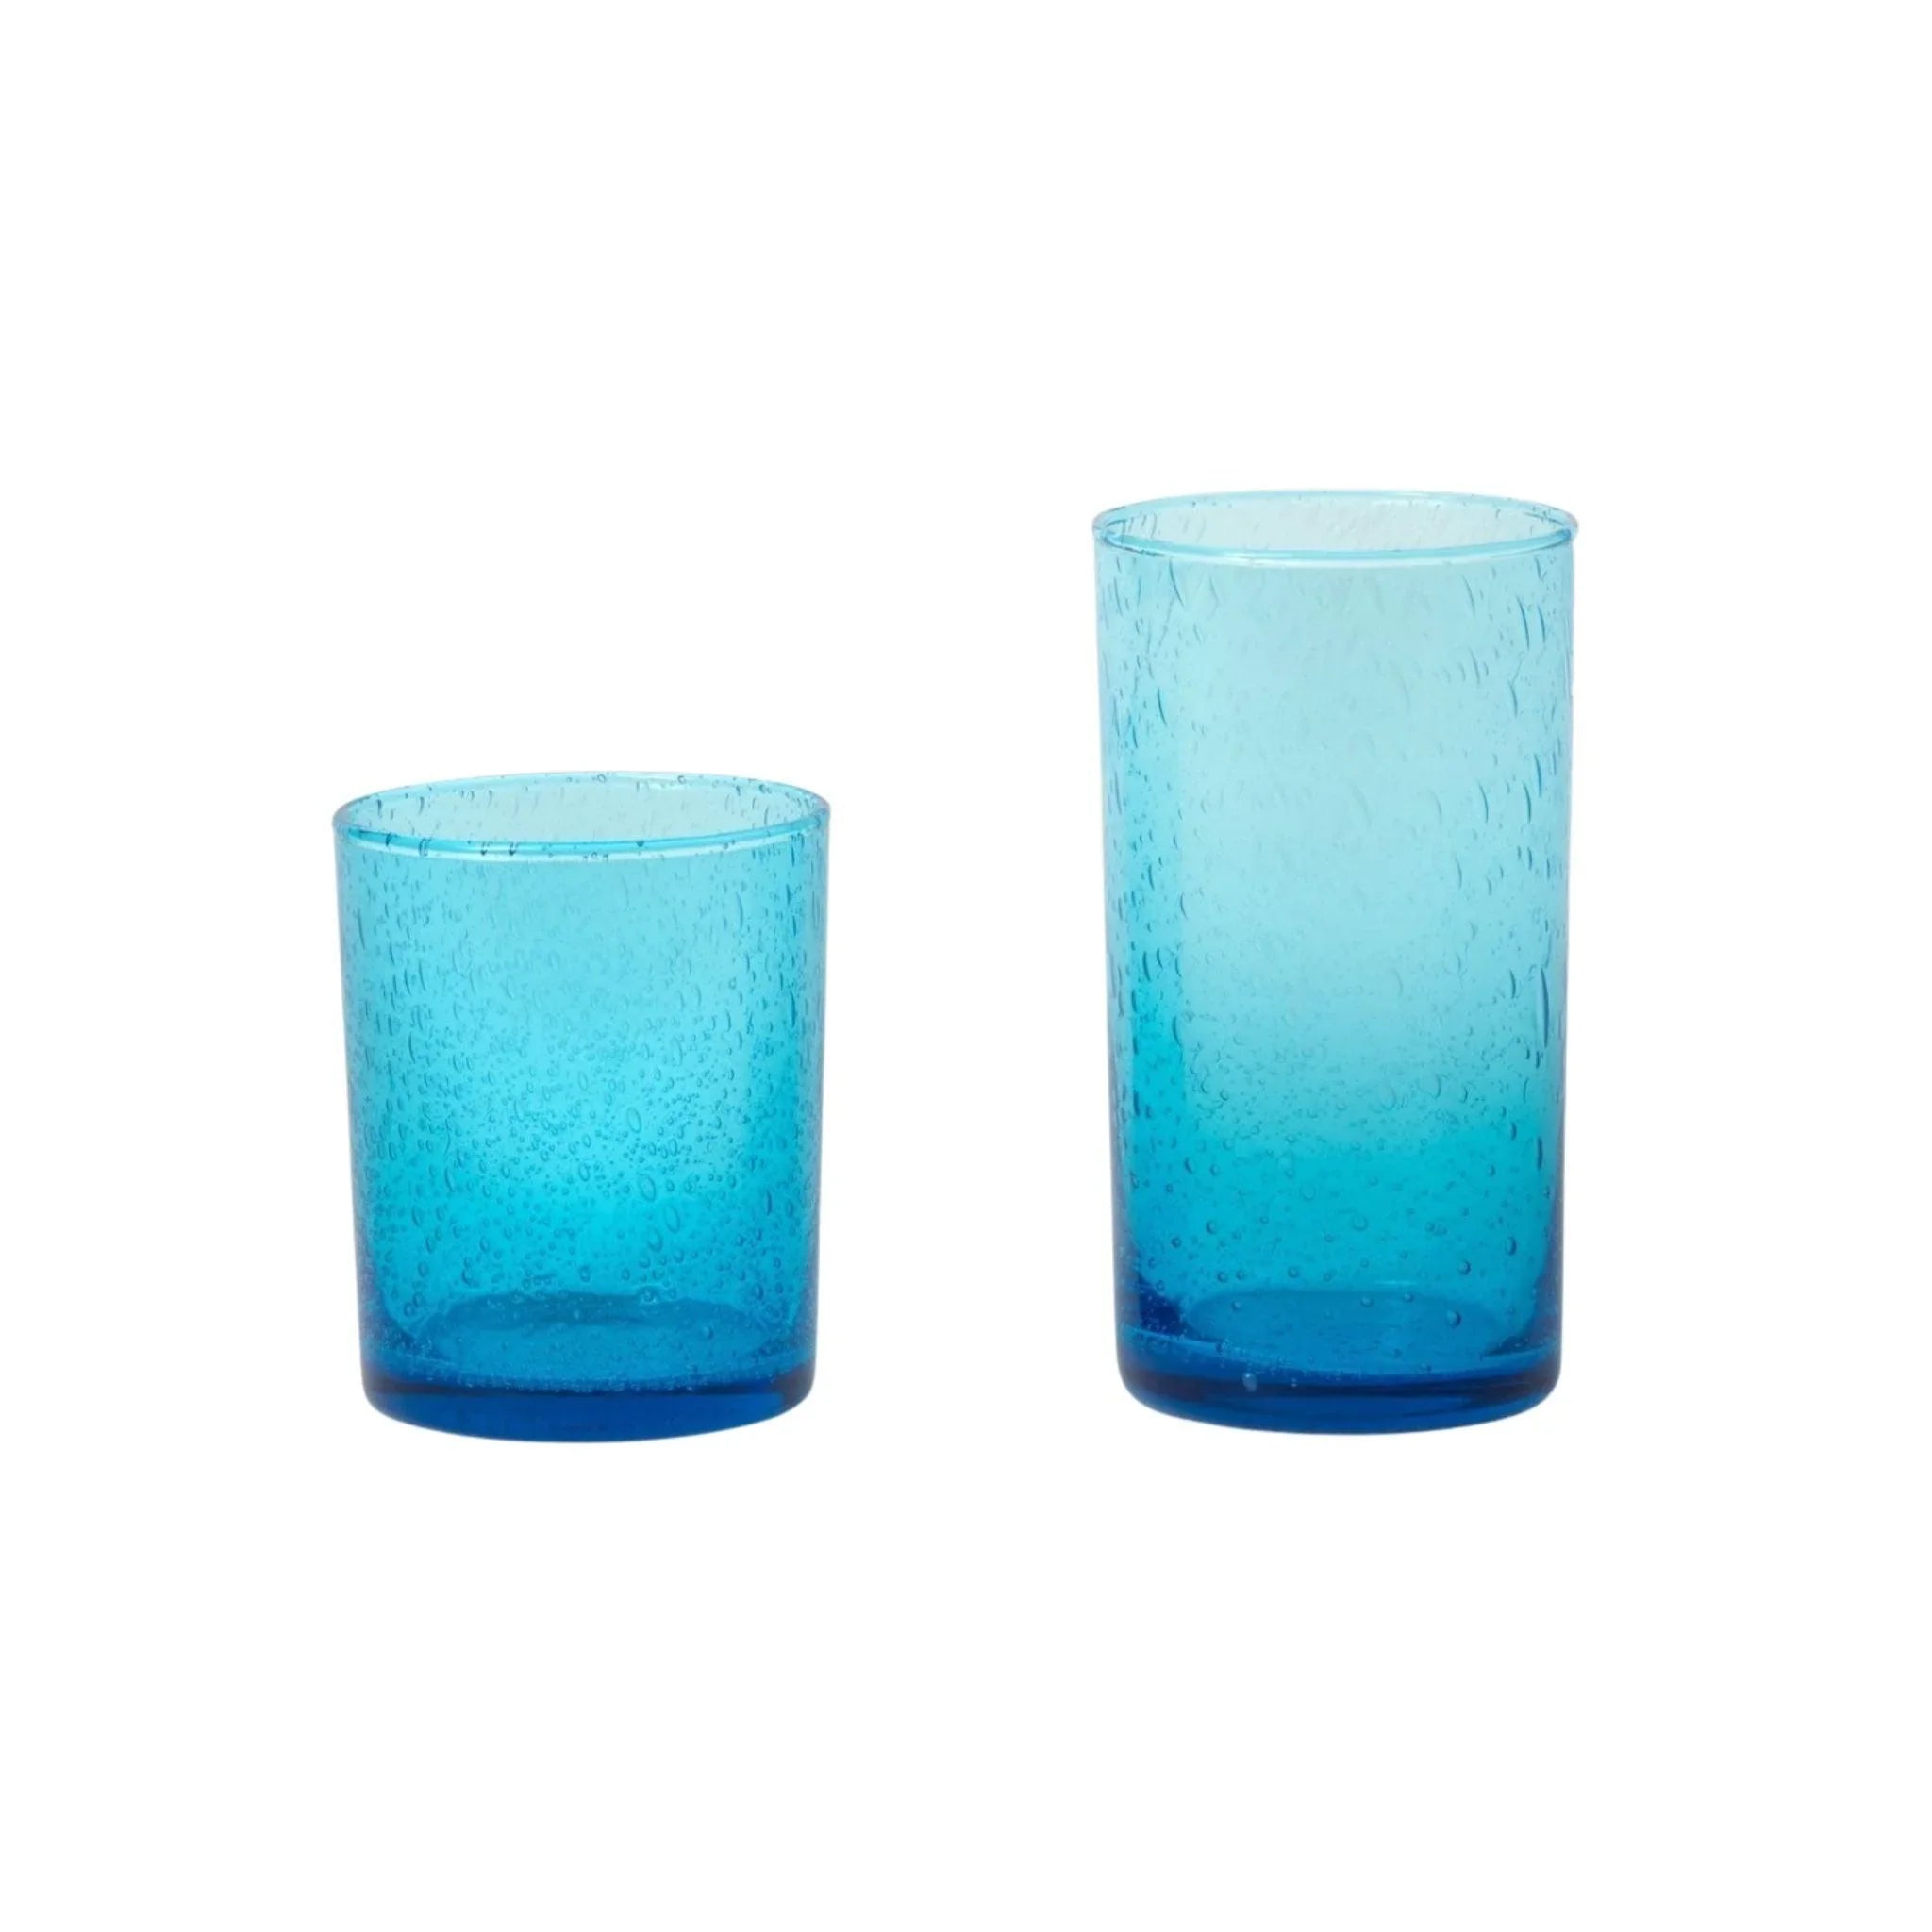 https://www.wellappointedhouse.com/cdn/shop/files/hand-blown-bubble-glass-design-glasses-in-sky-blue-drinkware-the-well-appointed-house-1_70274d11-7b9a-496d-bcfc-1c14ea505b19.webp?v=1691670582